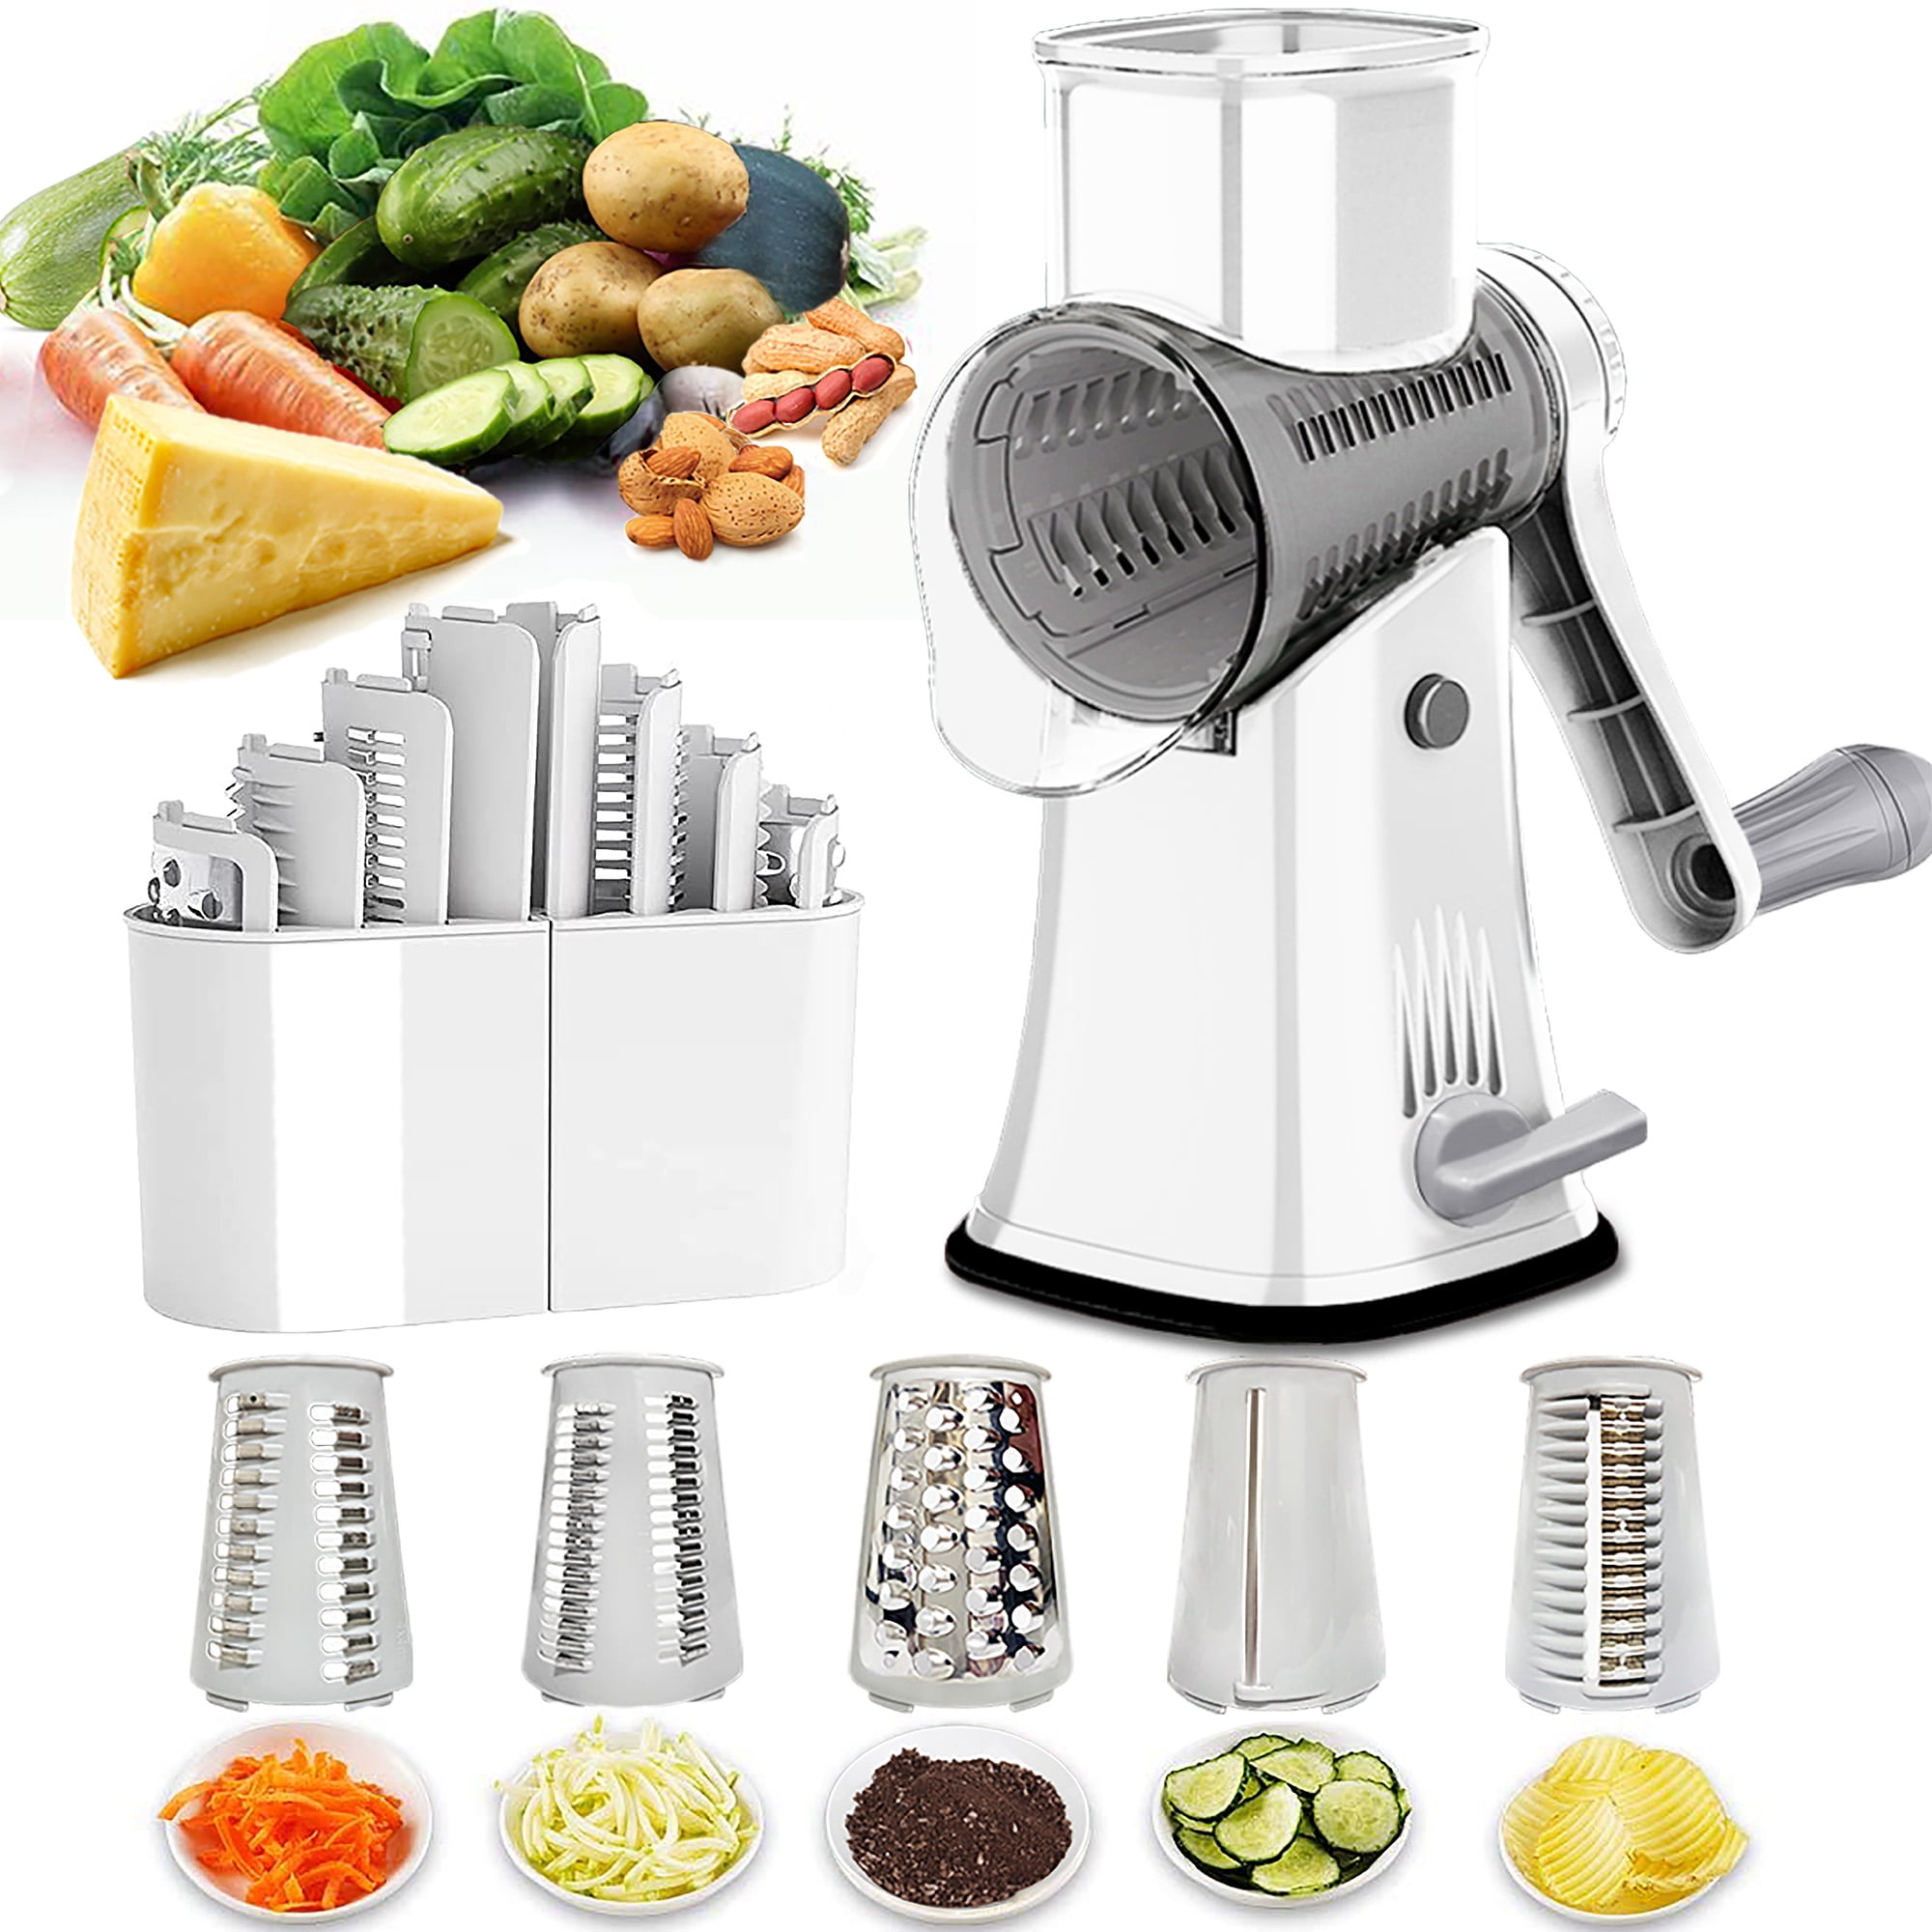 SliceEase Manual Vegetable Slicer Easy Round Mandoline For Potatoes,  Cheese, And More Compact Kitchen Gadget 210326 From Cong09, $15.08